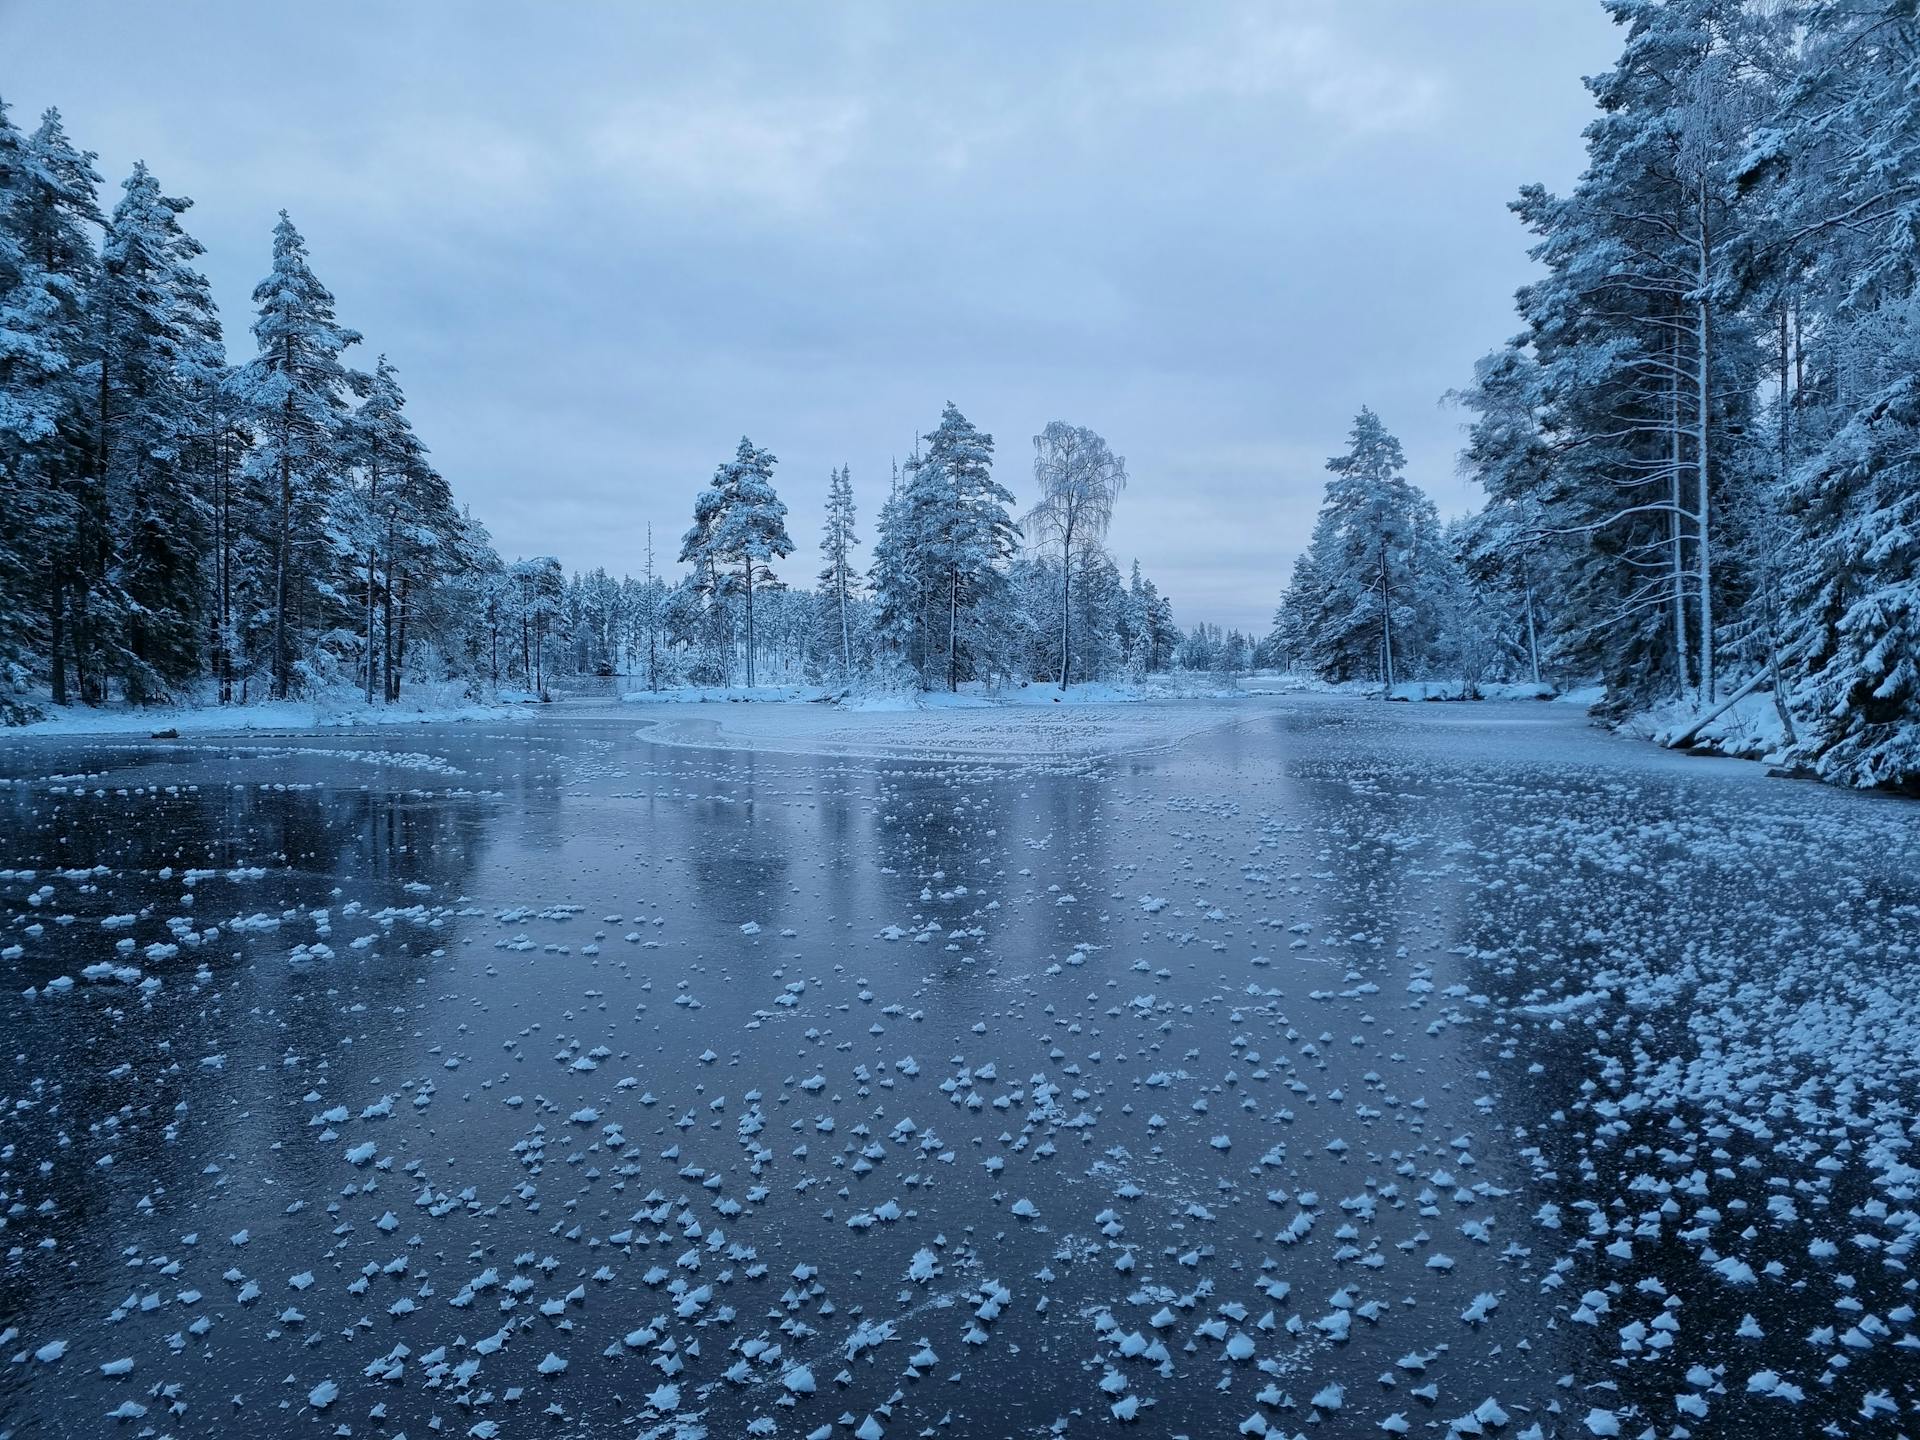 A mesmerizing frozen landscape with smooth ice on a lake and trees covered by snow.